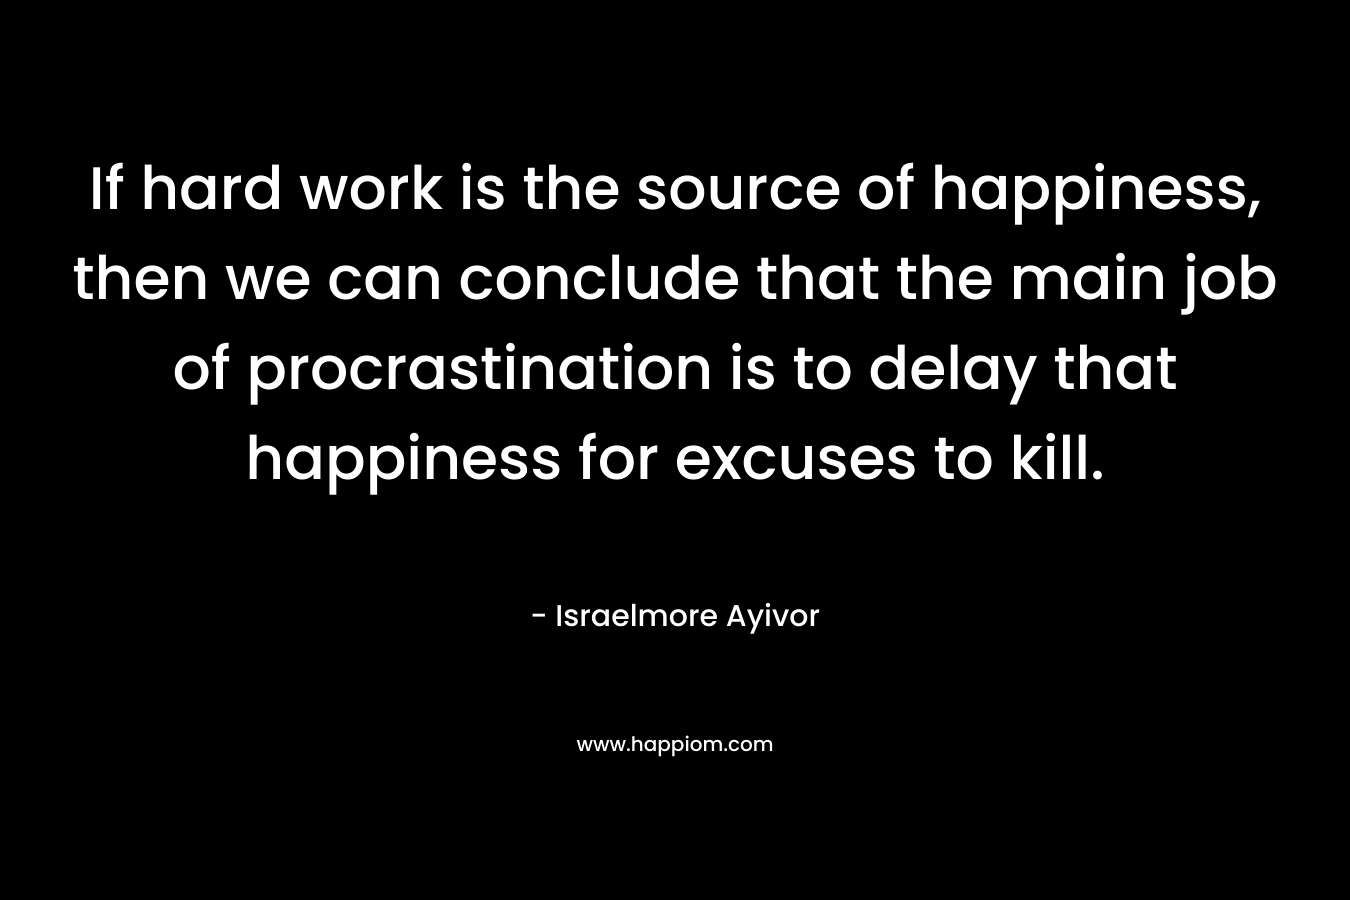 If hard work is the source of happiness, then we can conclude that the main job of procrastination is to delay that happiness for excuses to kill.